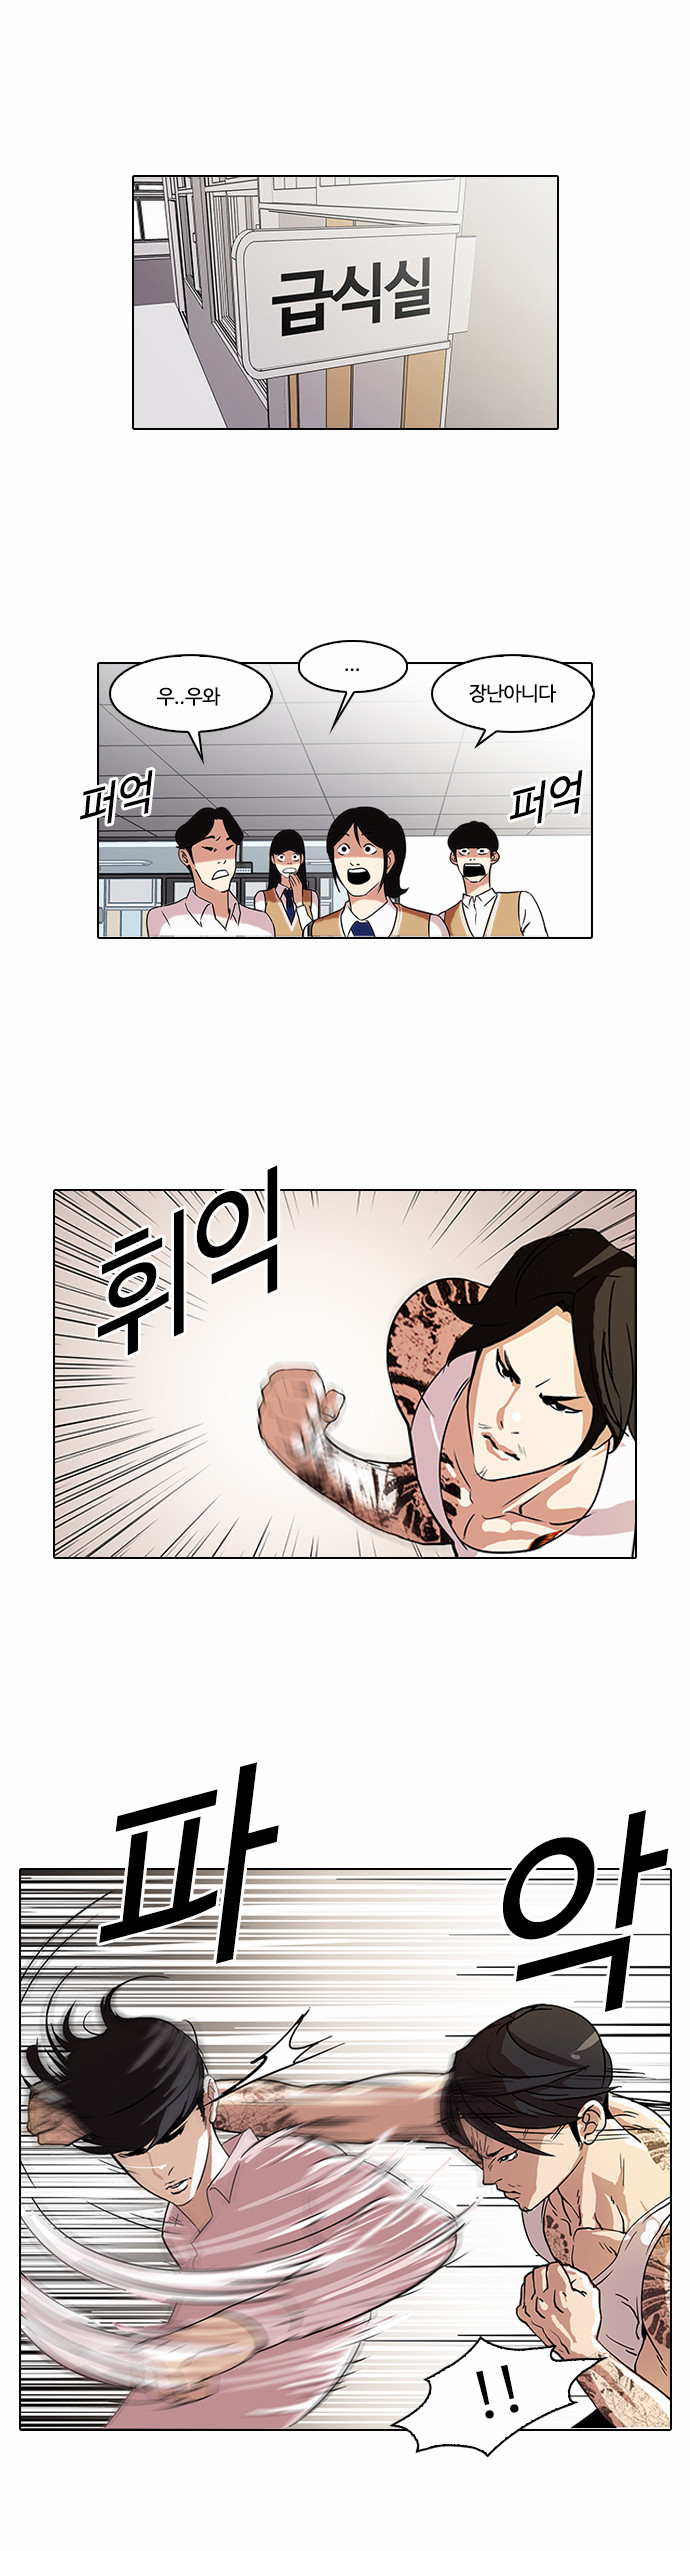 Lookism - Chapter 79 - Page 1